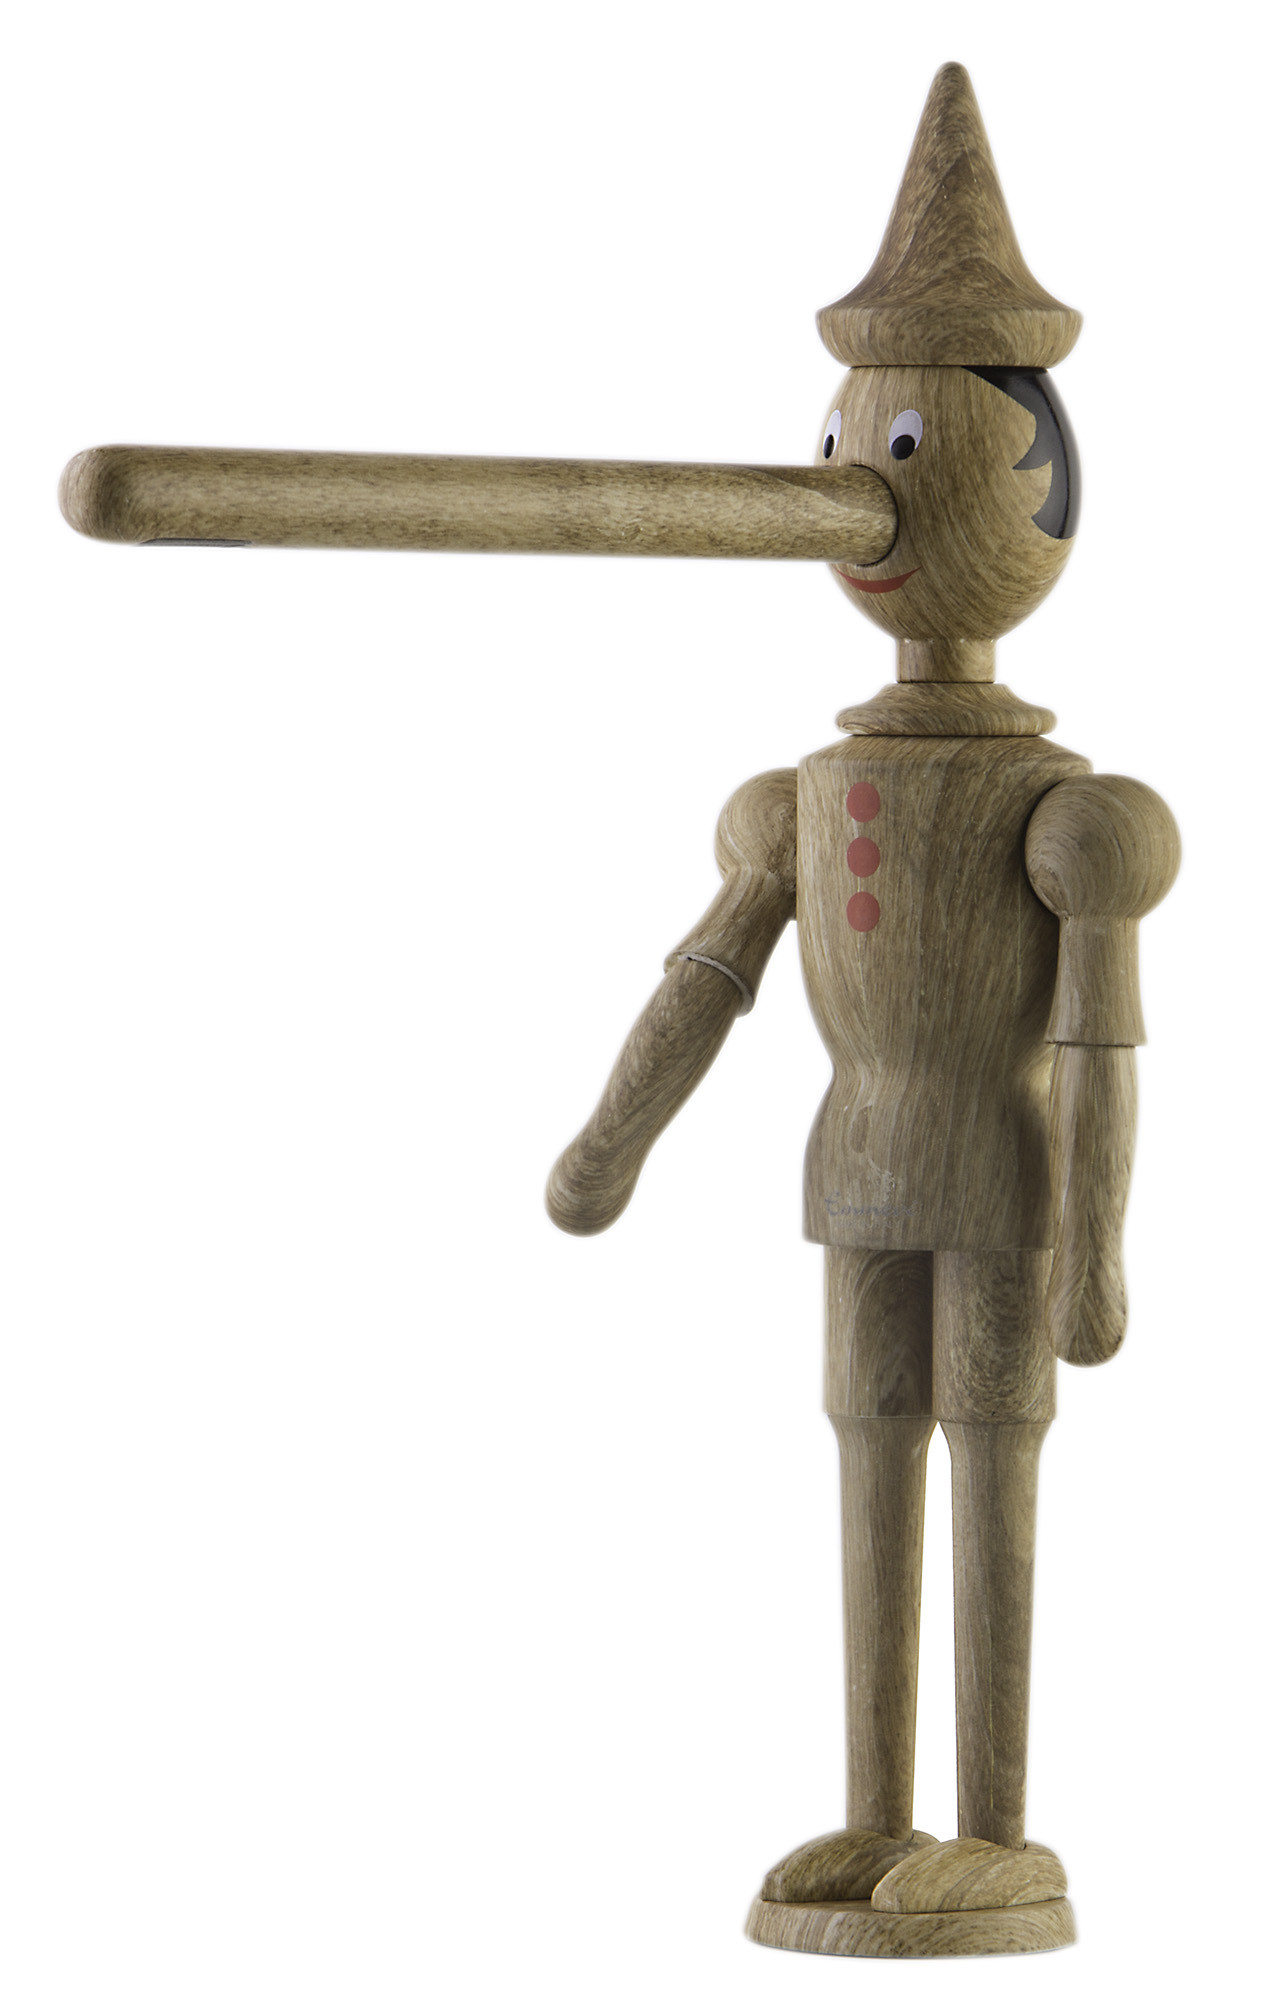 Emmevi 1887 Pinocchio Faucet from Italy is The Coolest Faucet in Town